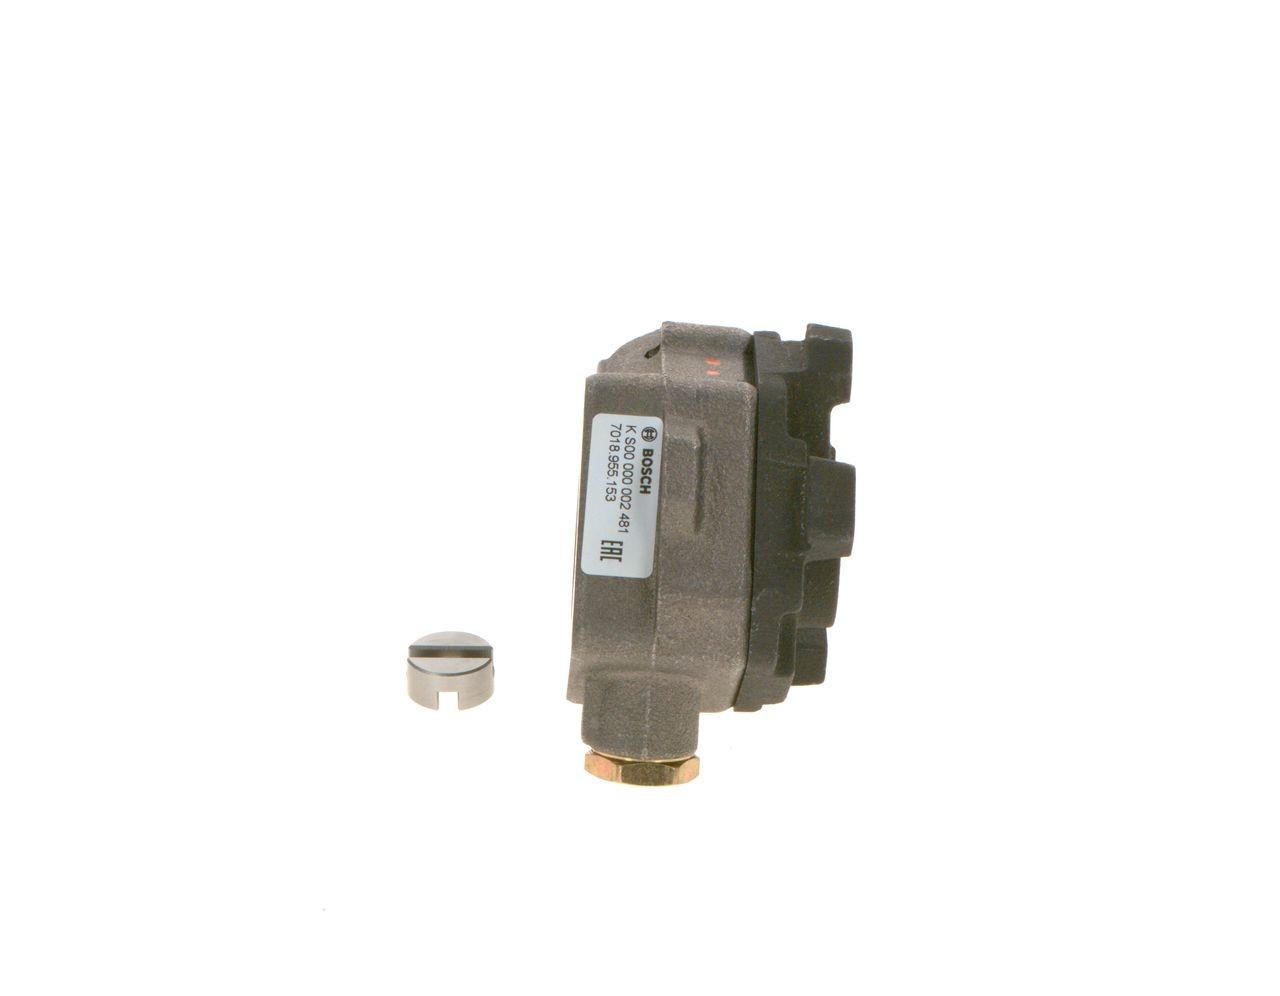 KS00000002 Fuel pump motor BOSCH K S00 000 002 review and test